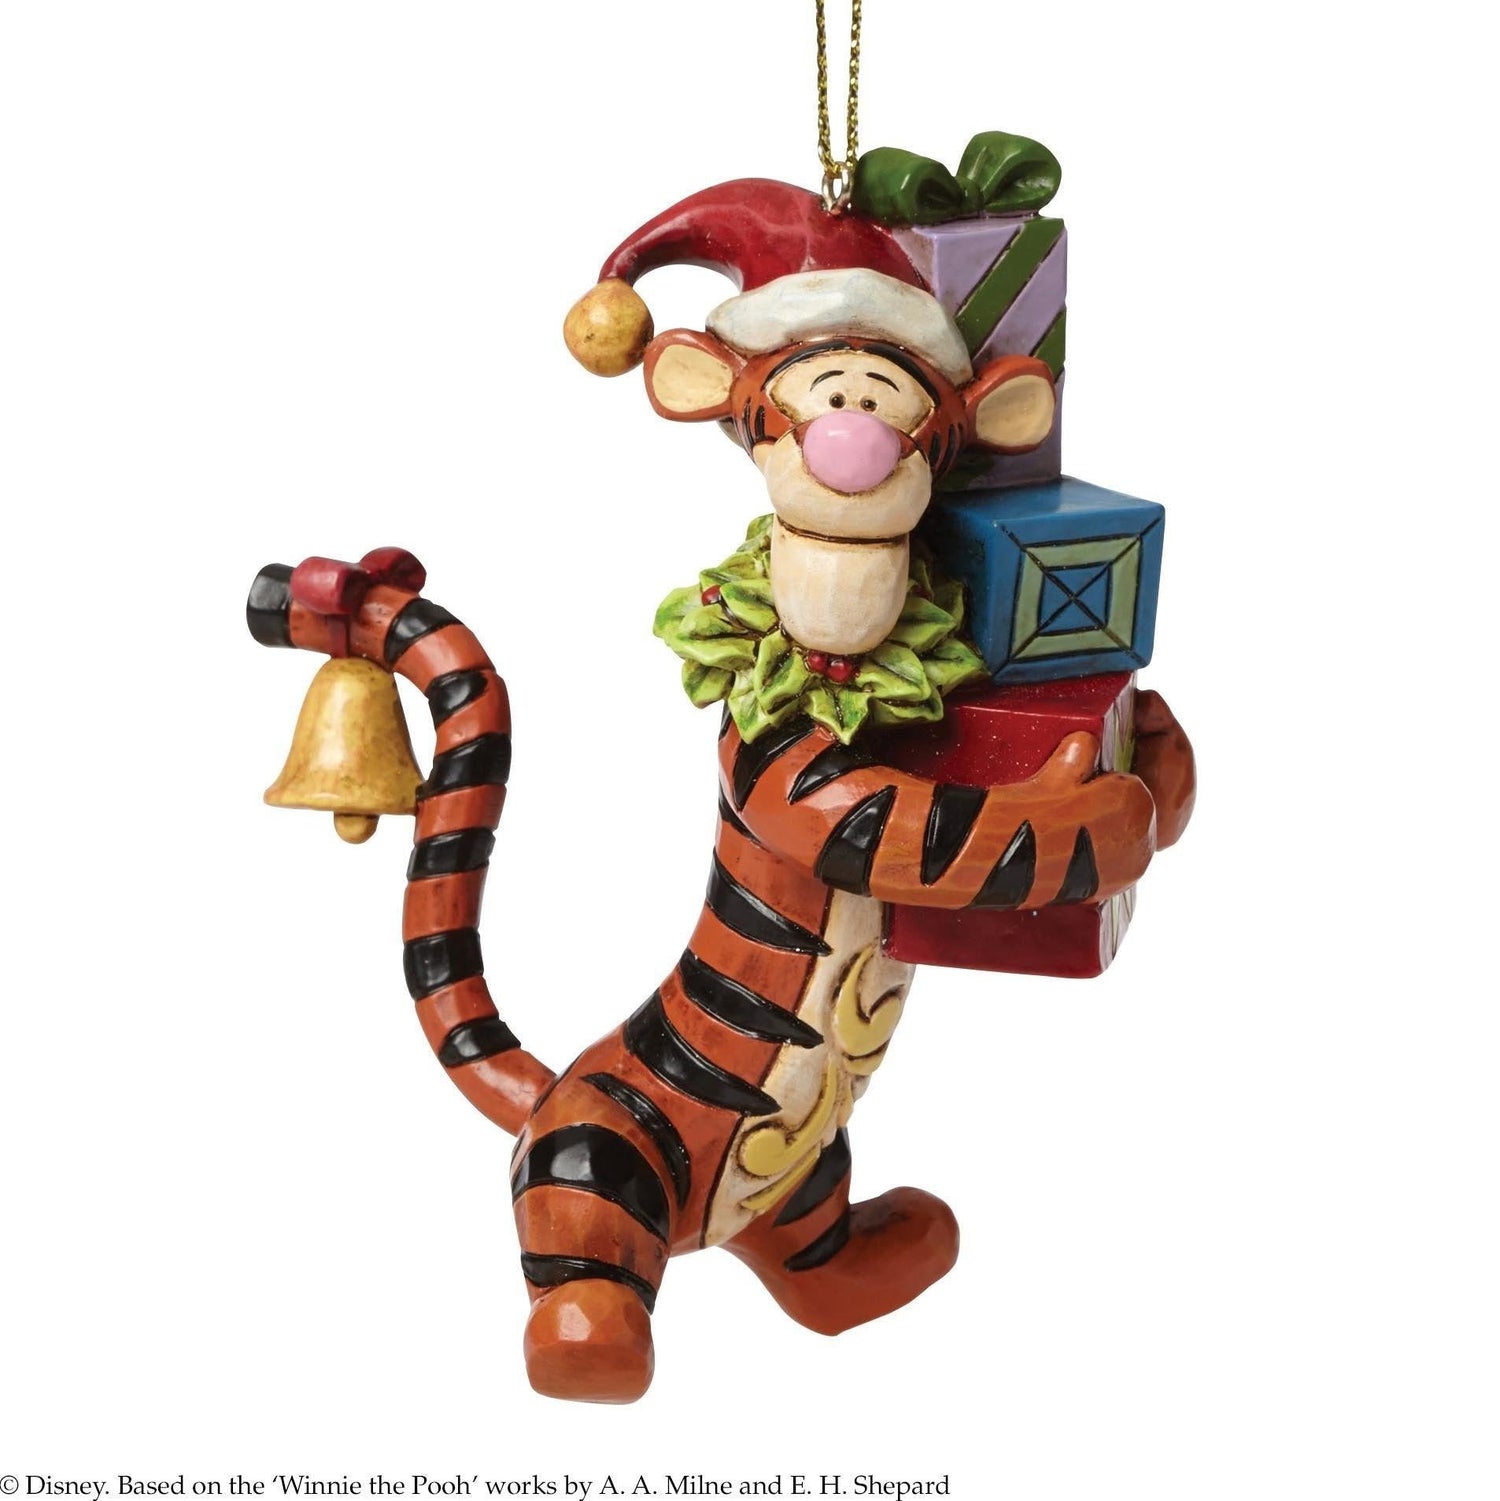 Christmas Decorations, Ornaments and Figurines - Gallery Gifts Online 